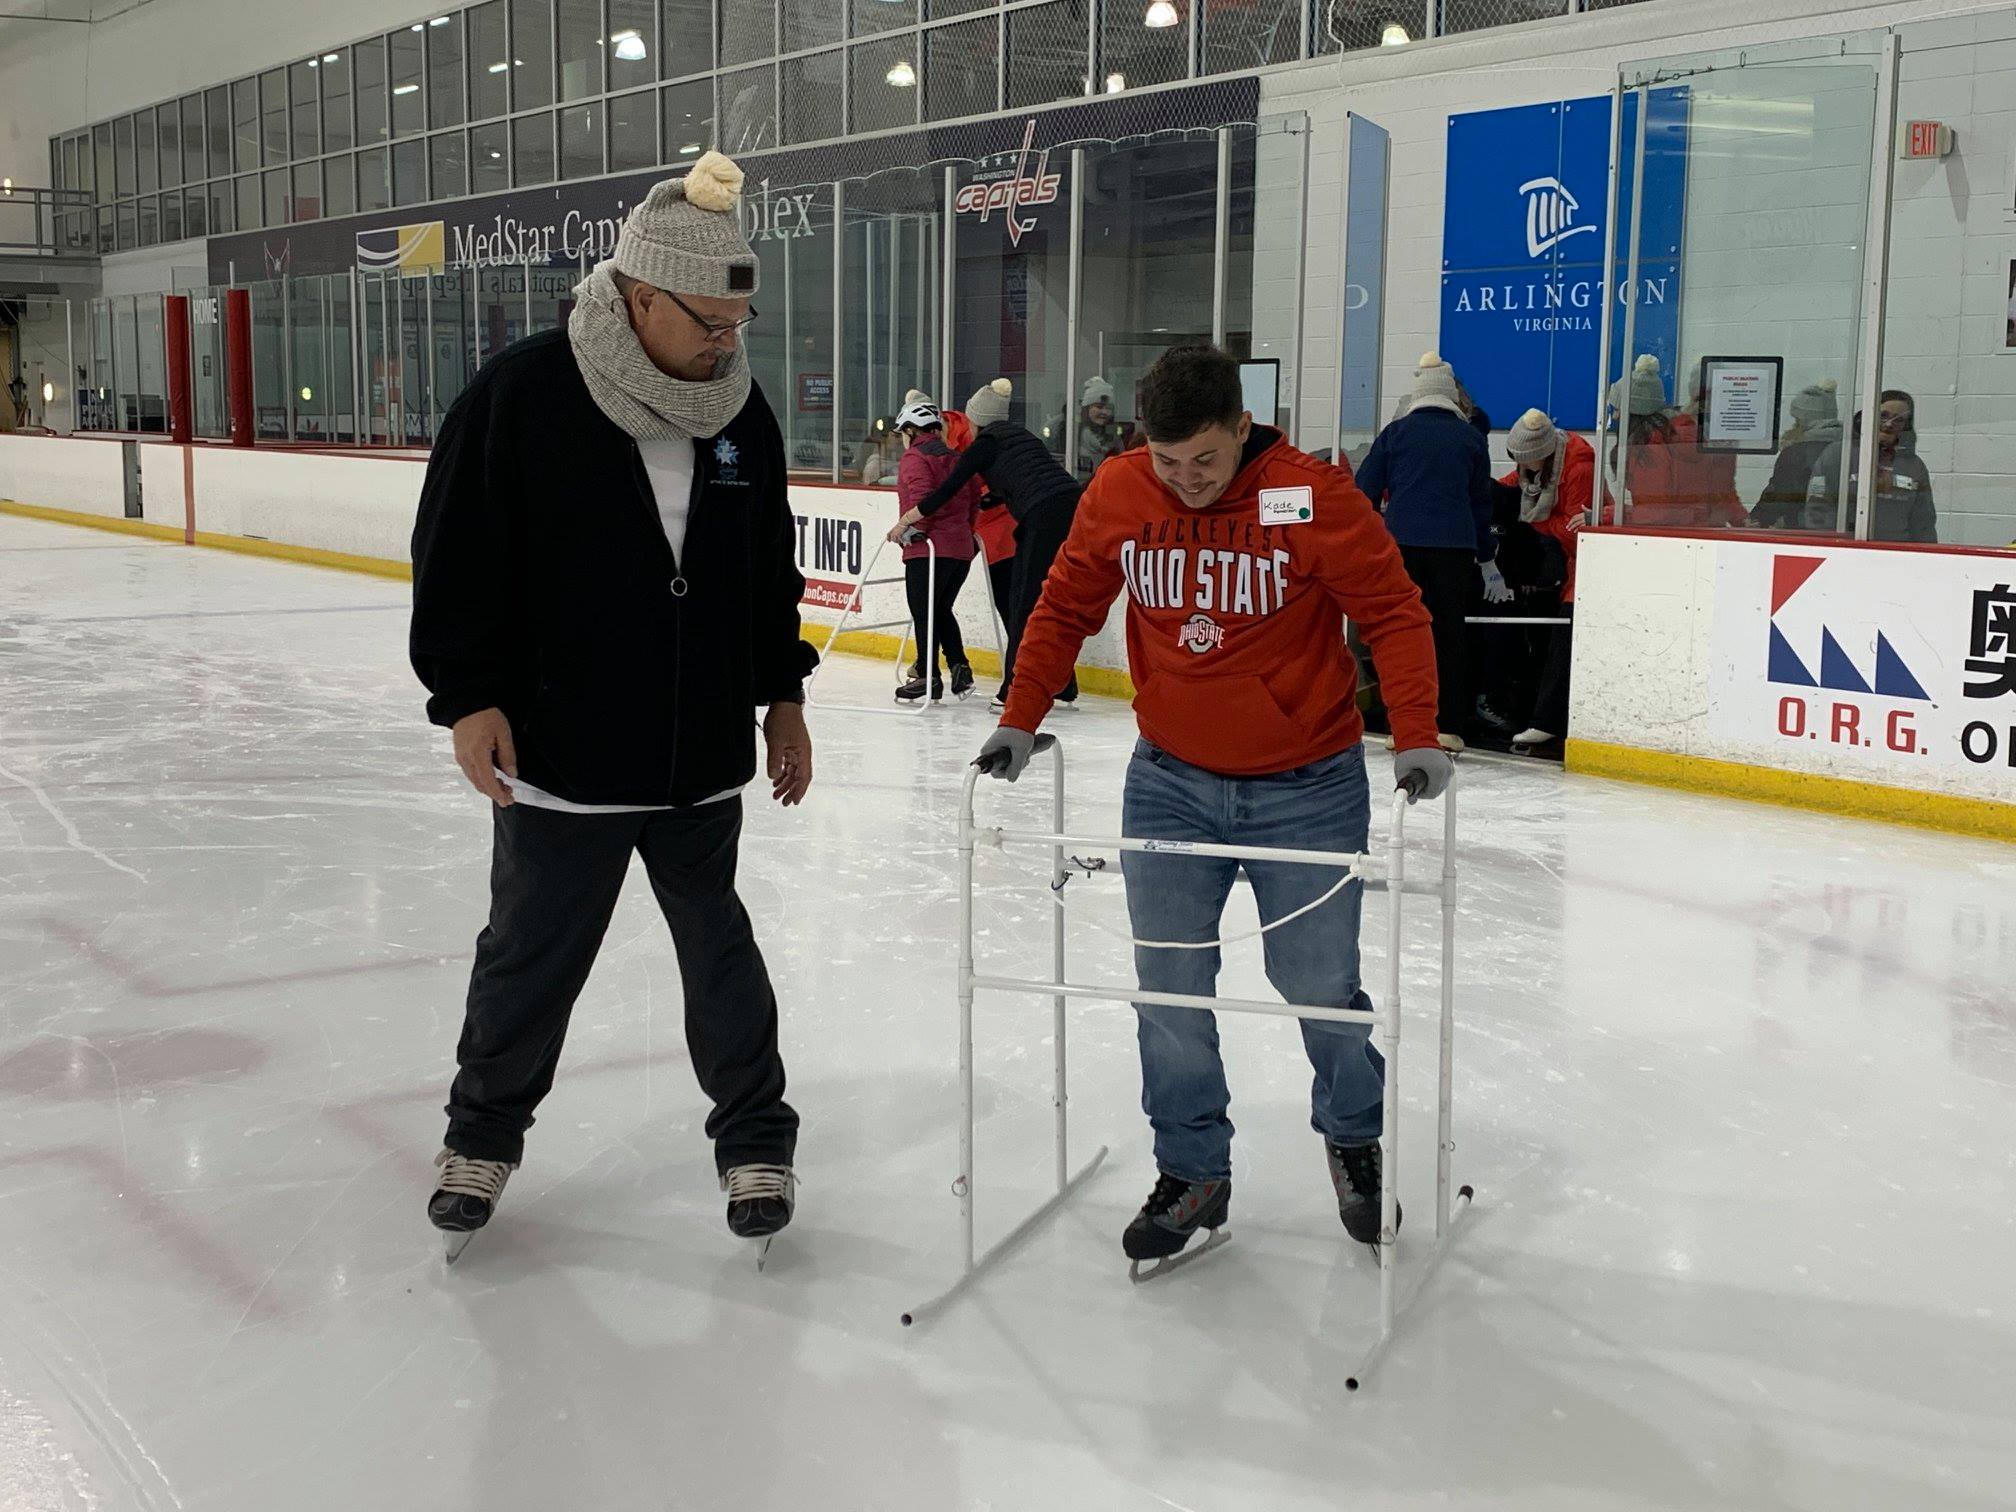 A Veteran learns to skate at the MedStar Ice Complex.